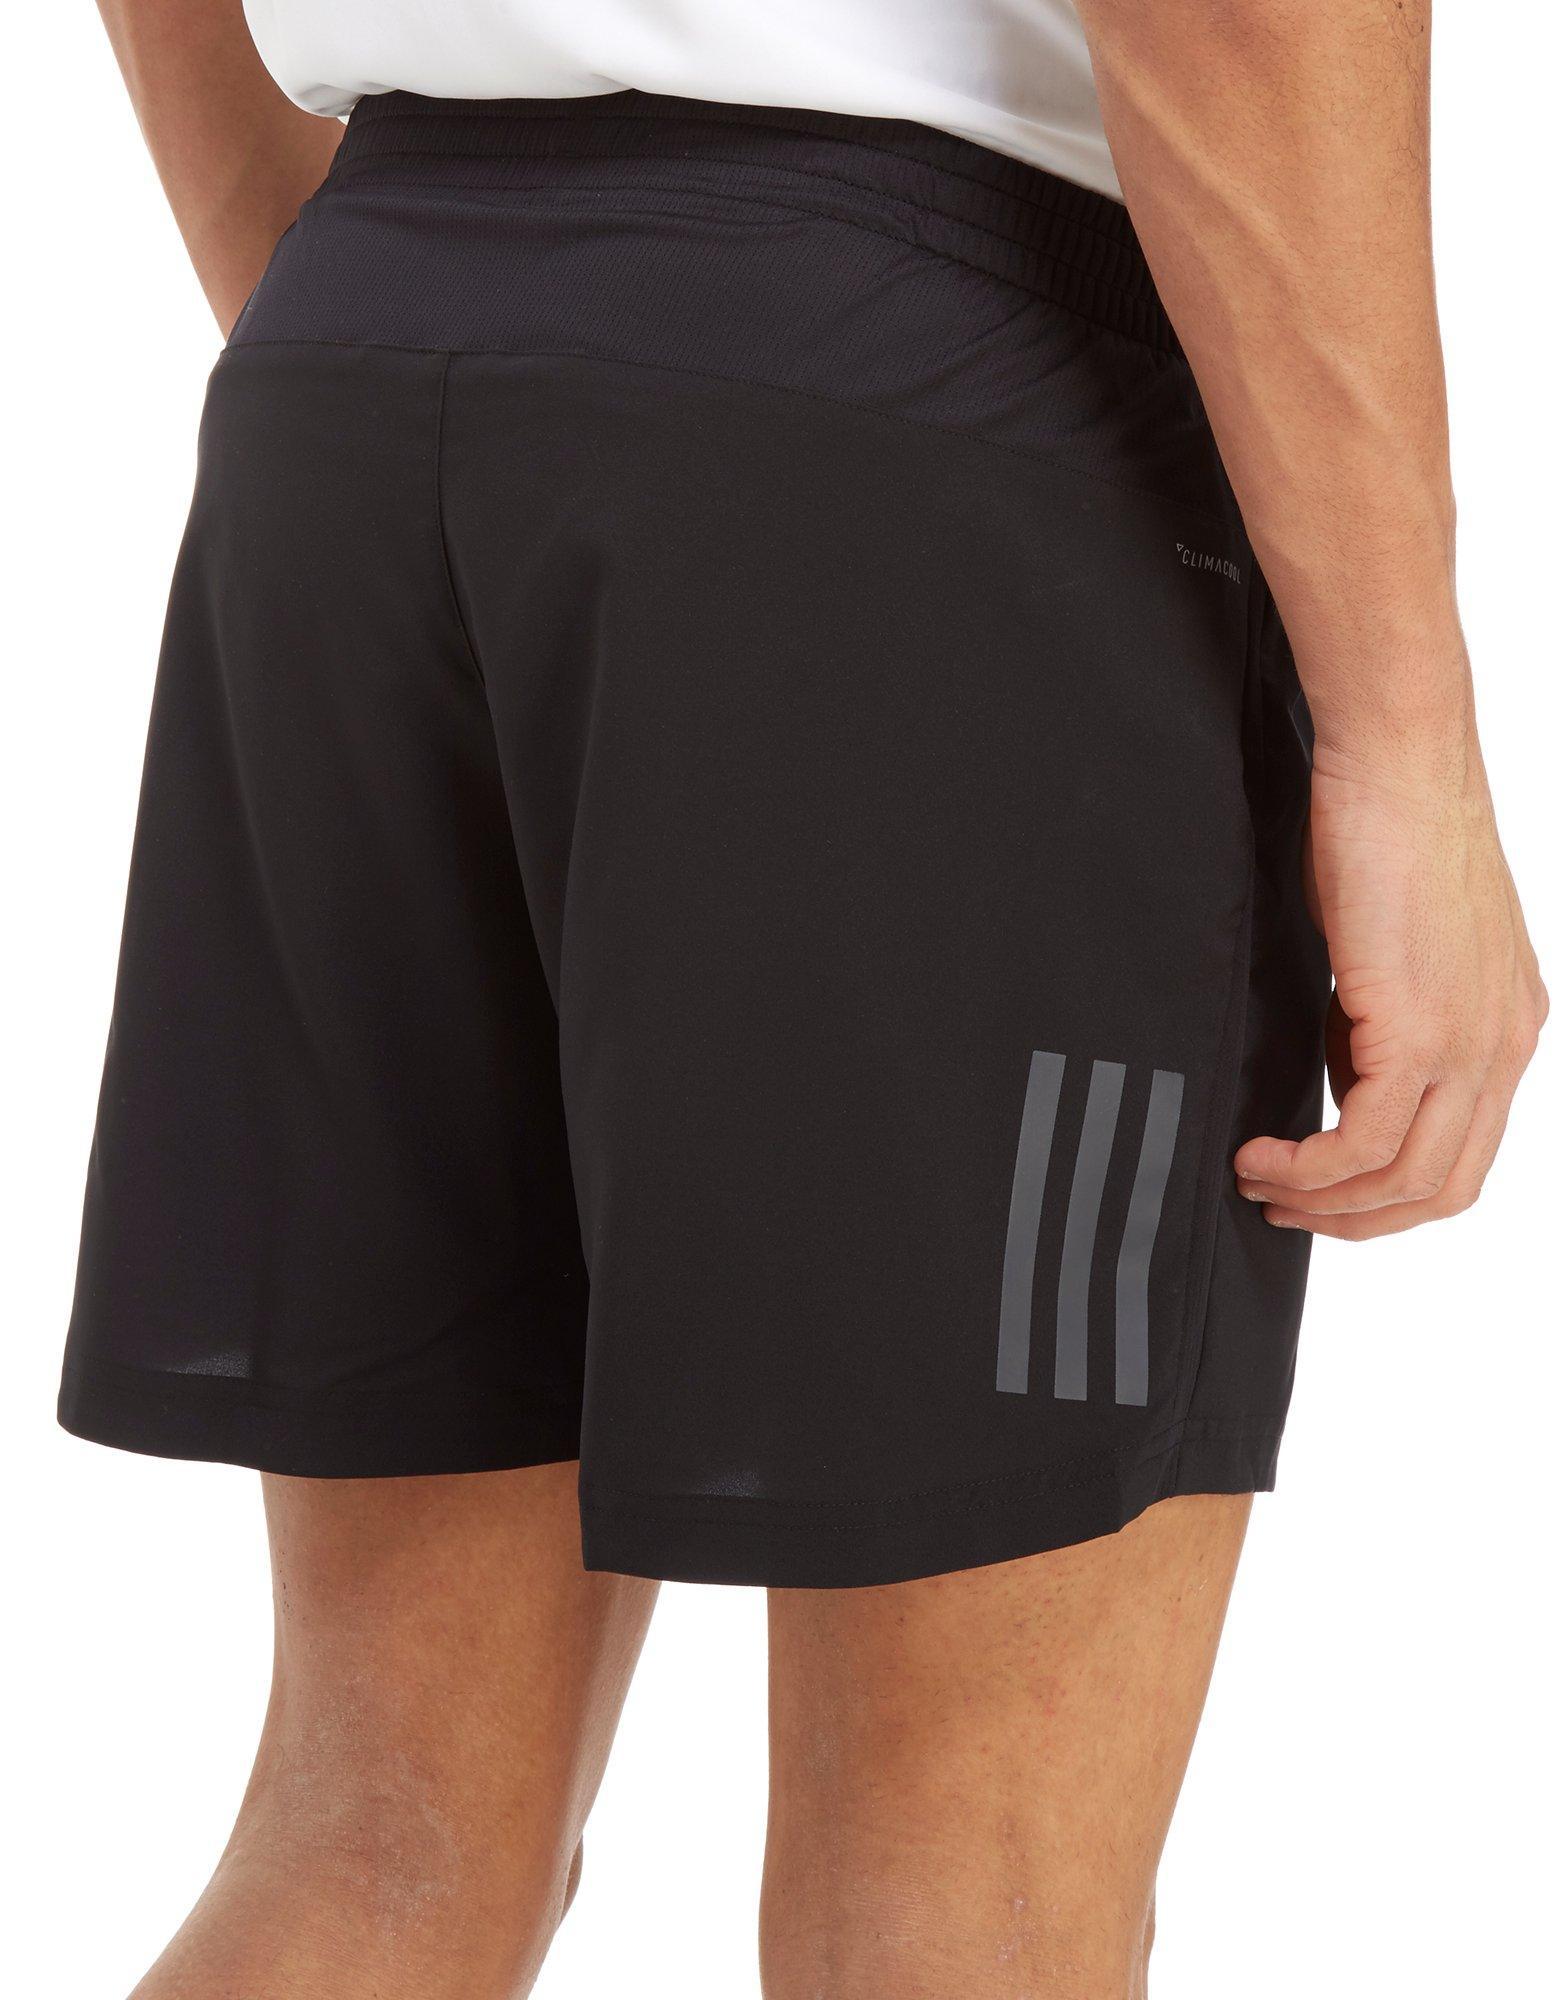 adidas Synthetic Response 7 Inch Shorts in Black for Men - Lyst